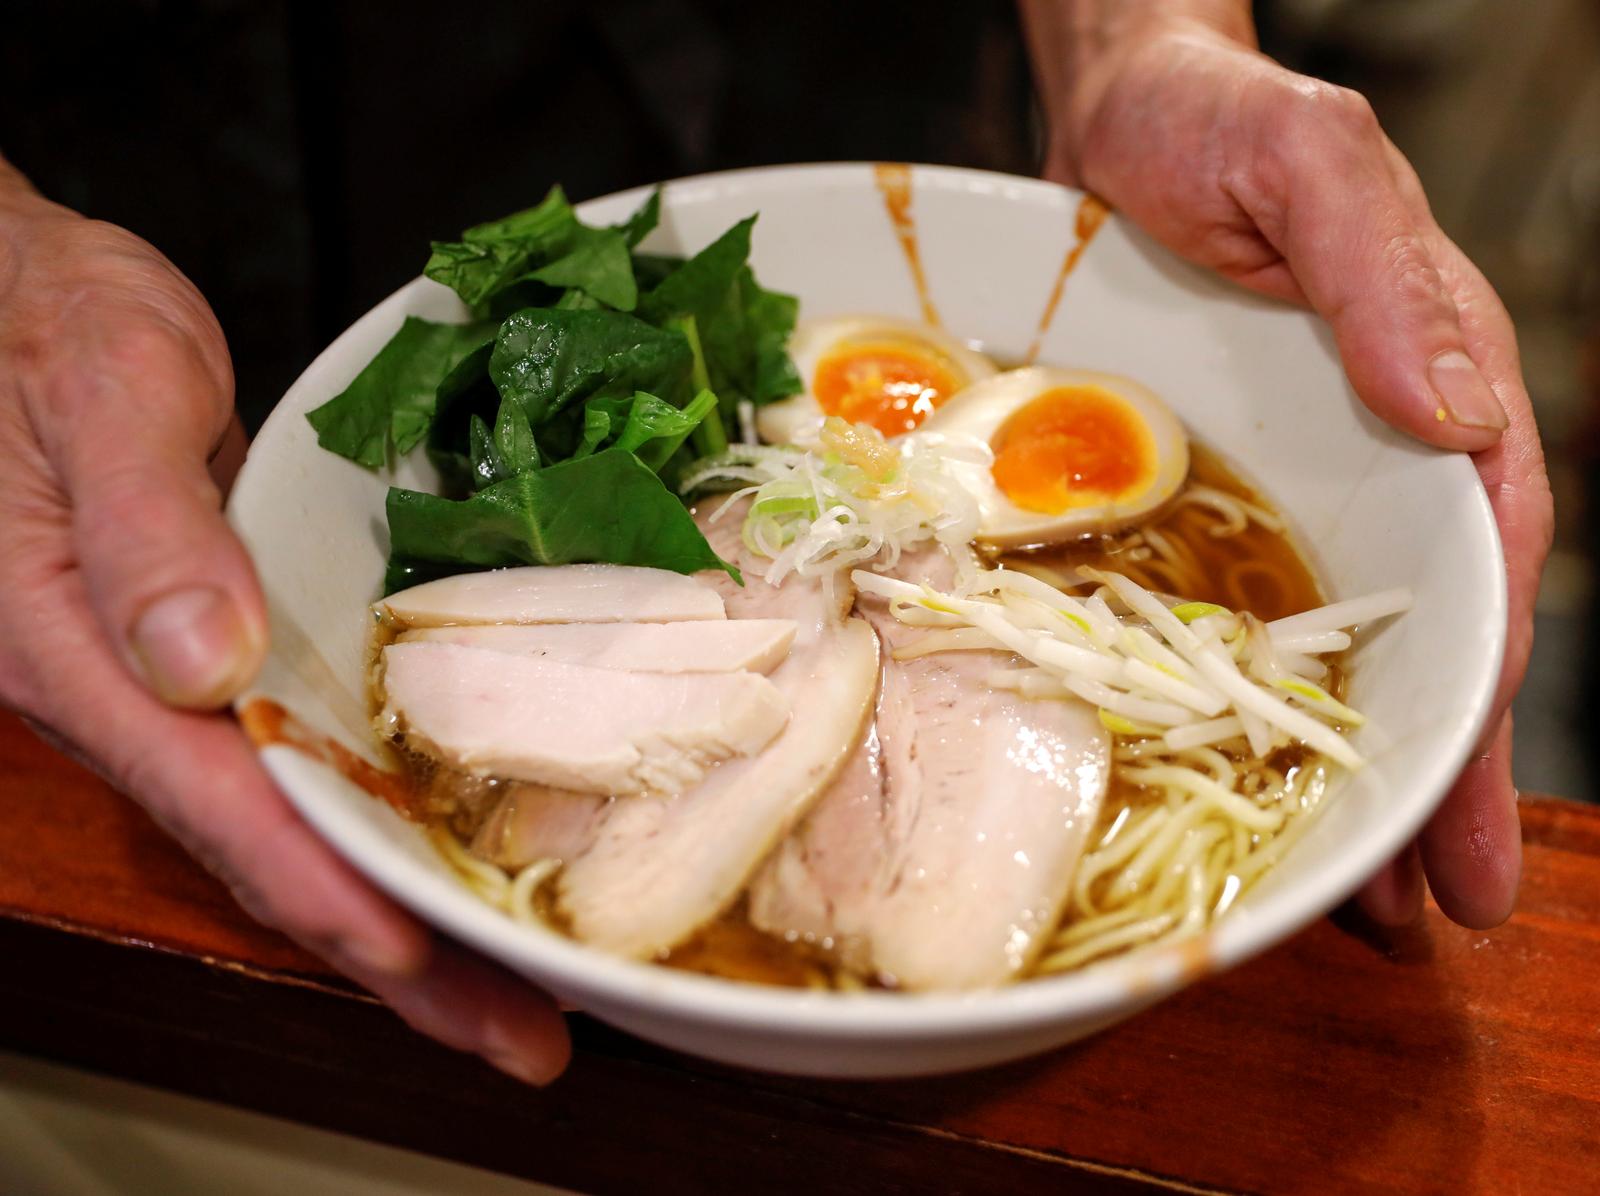 Japan's ramen bars struggle to stay open as COVID hammers small firms